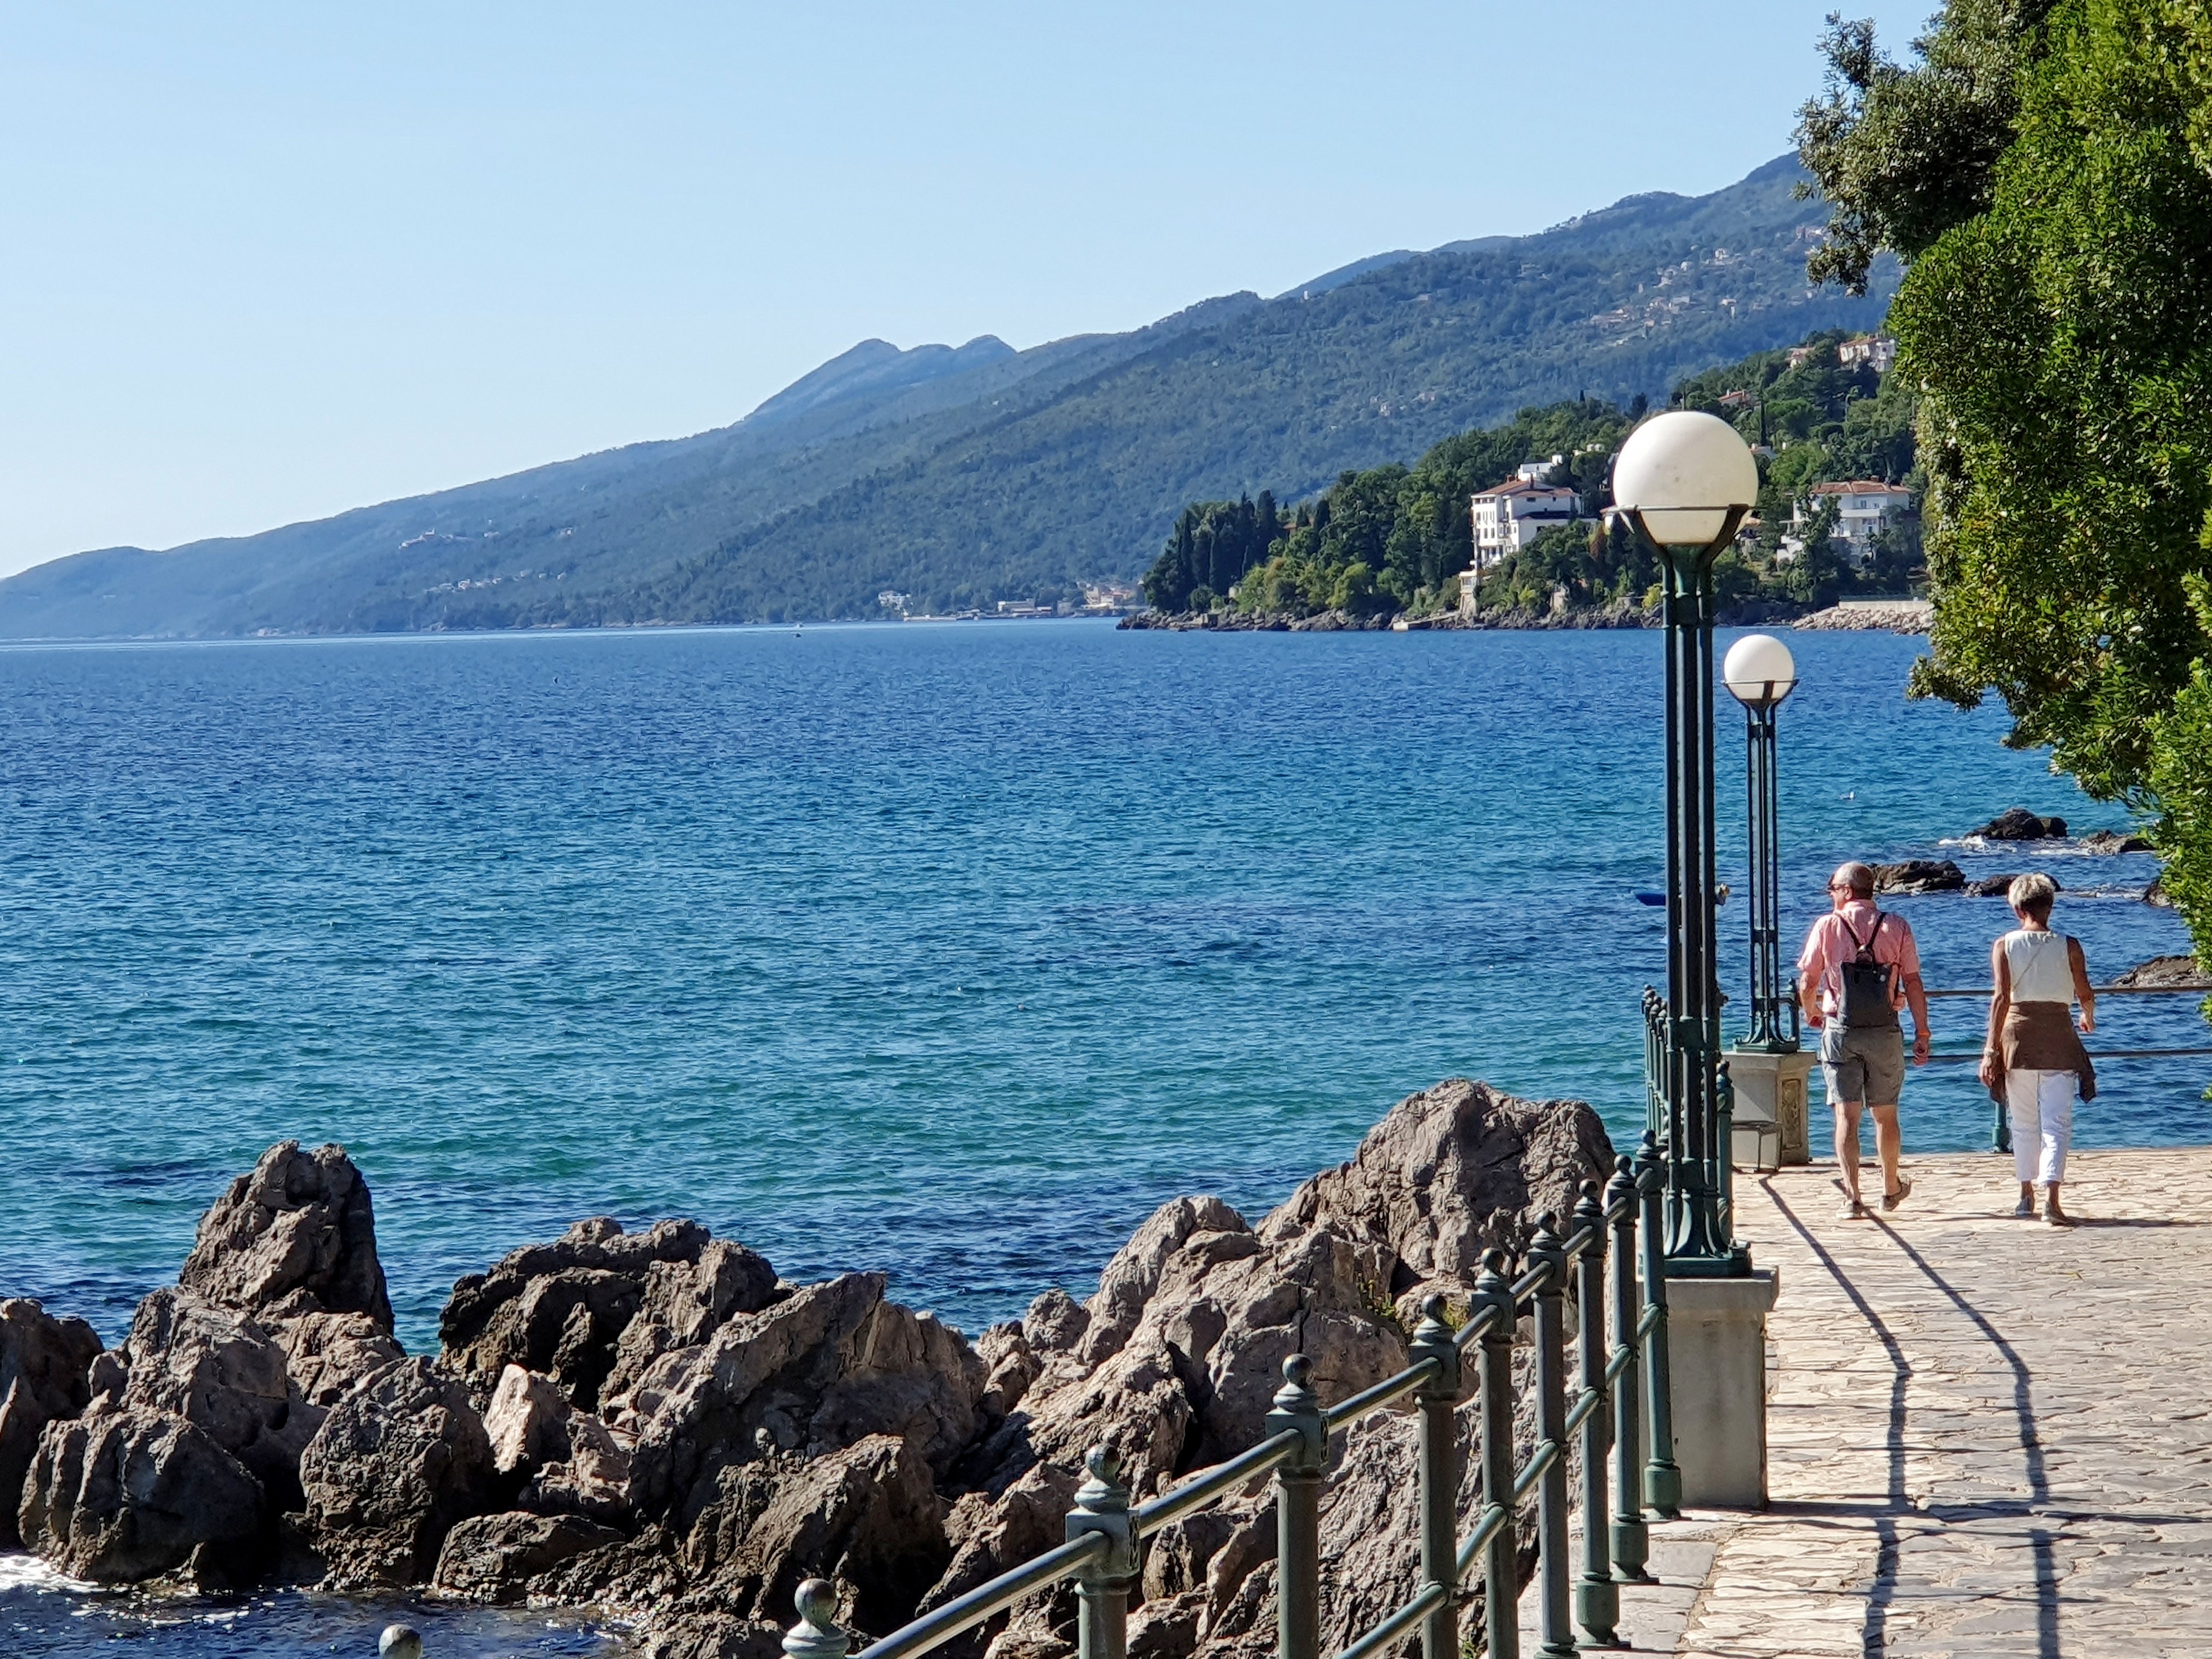 Kvarner Bay Tour with Opatija, Lovran and Local Specialties